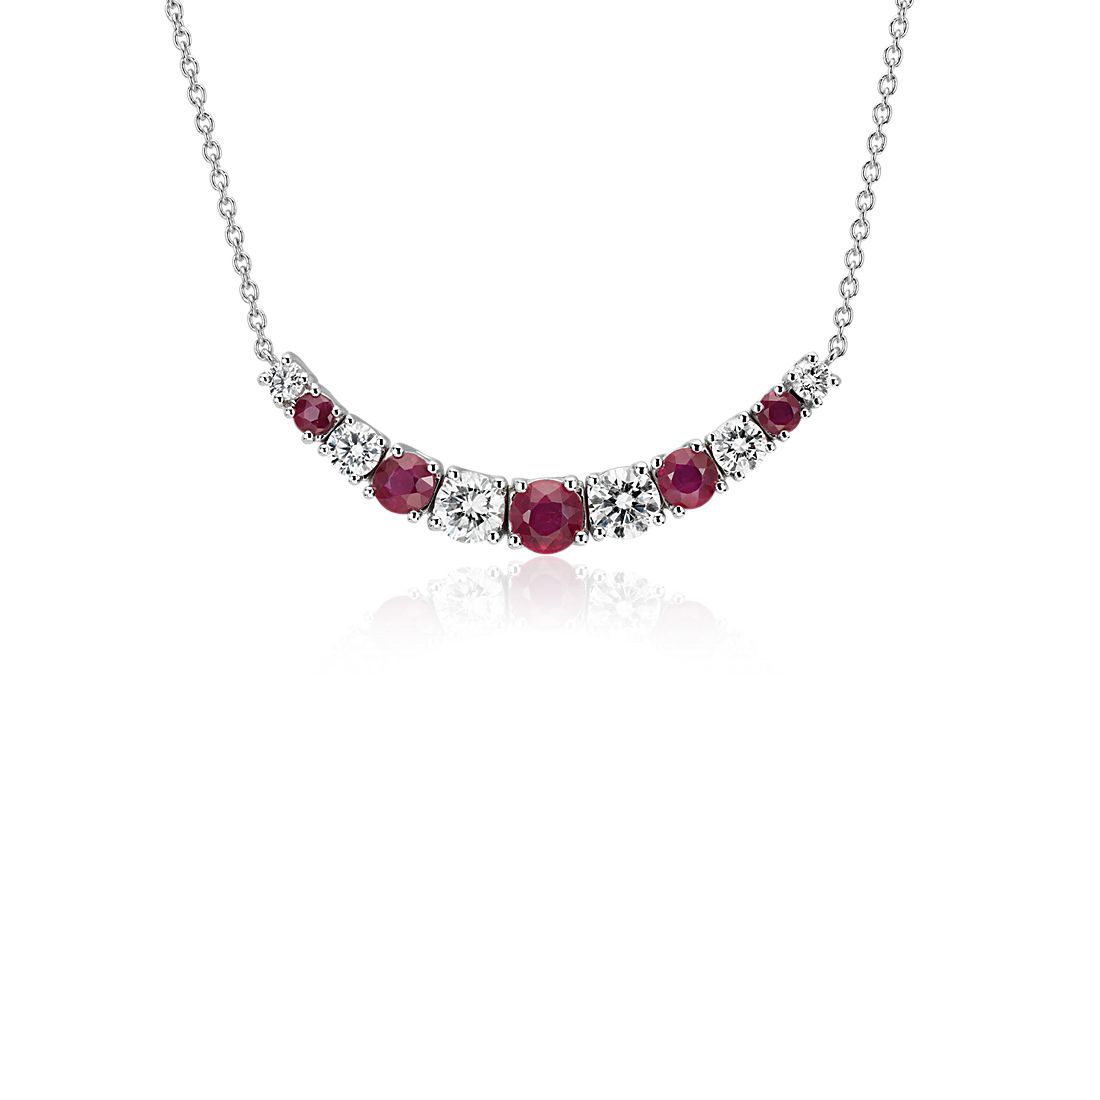 Graduated Ruby and Diamond Smile Necklace in 14k White Gold